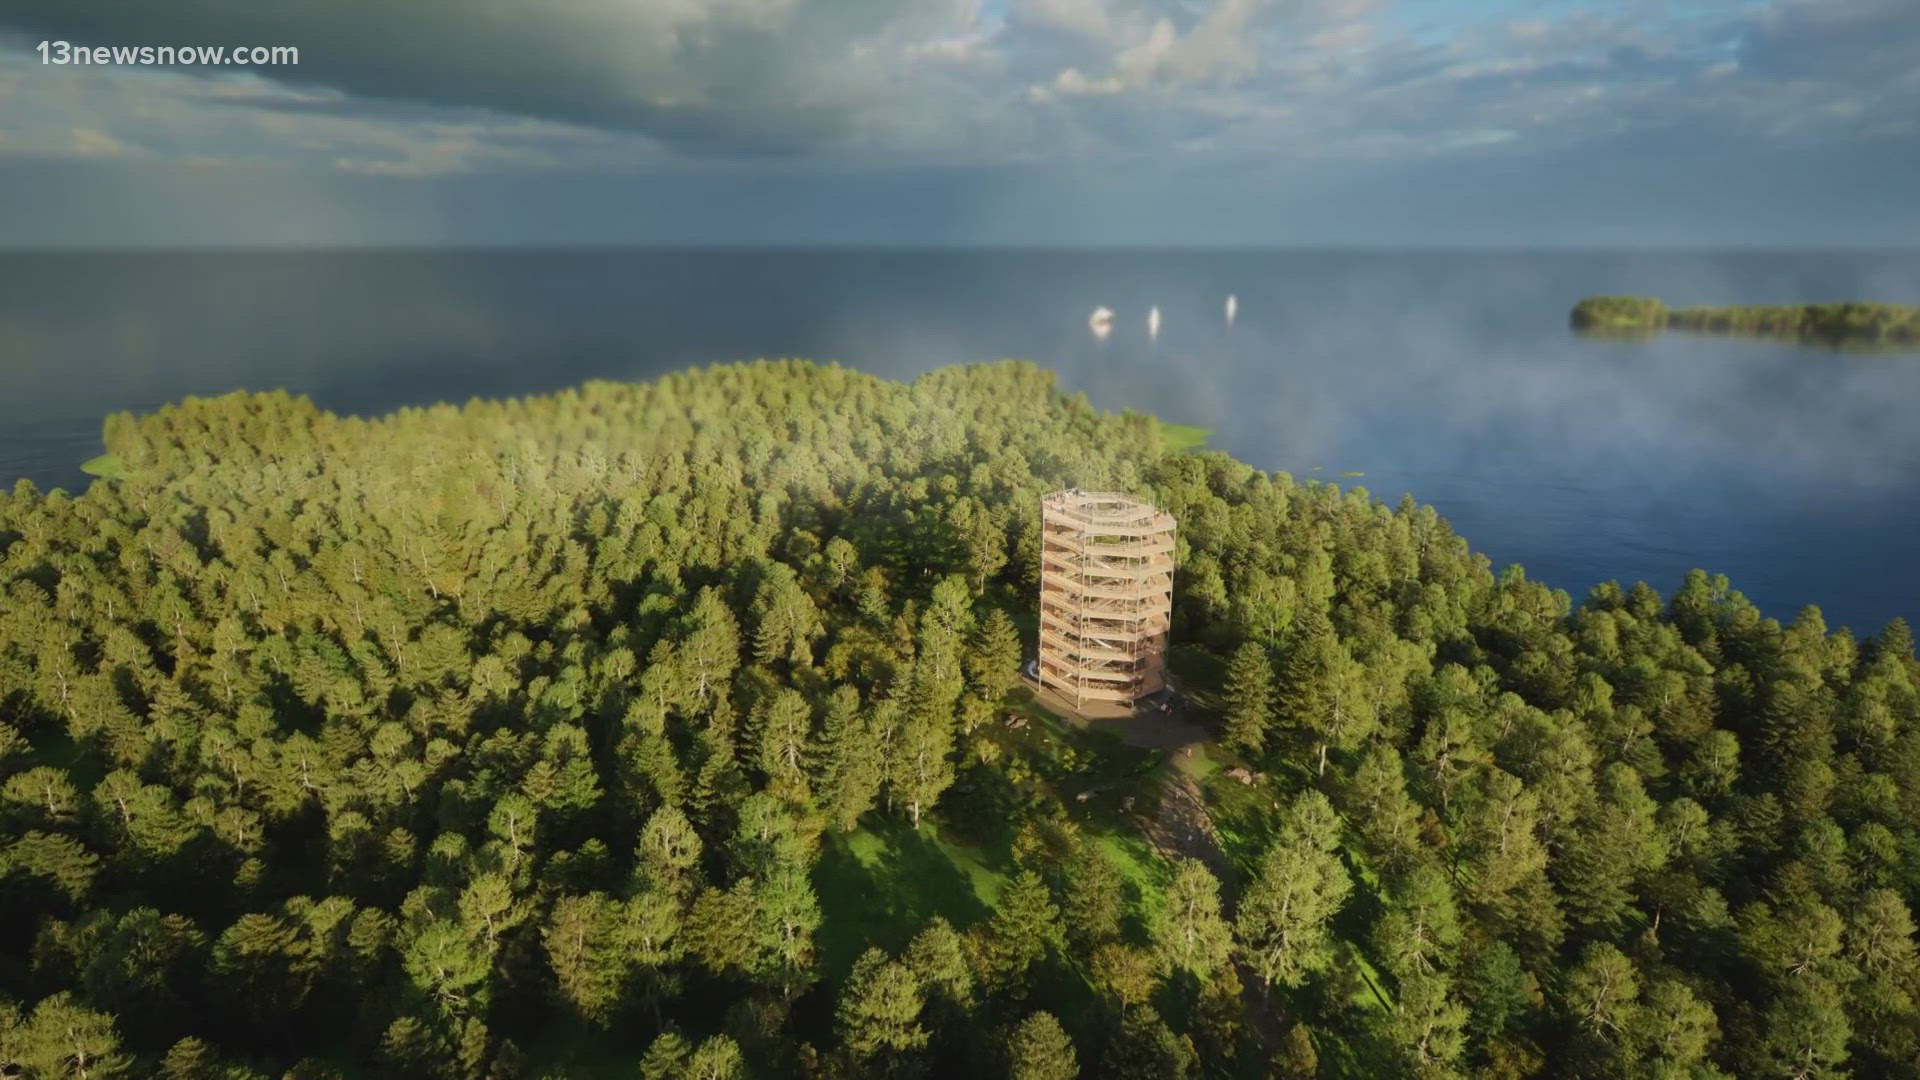 Officials with Adventure Park at the Virginia Aquarium said a new 125-foot observation tower is coming to Virginia Beach this summer.